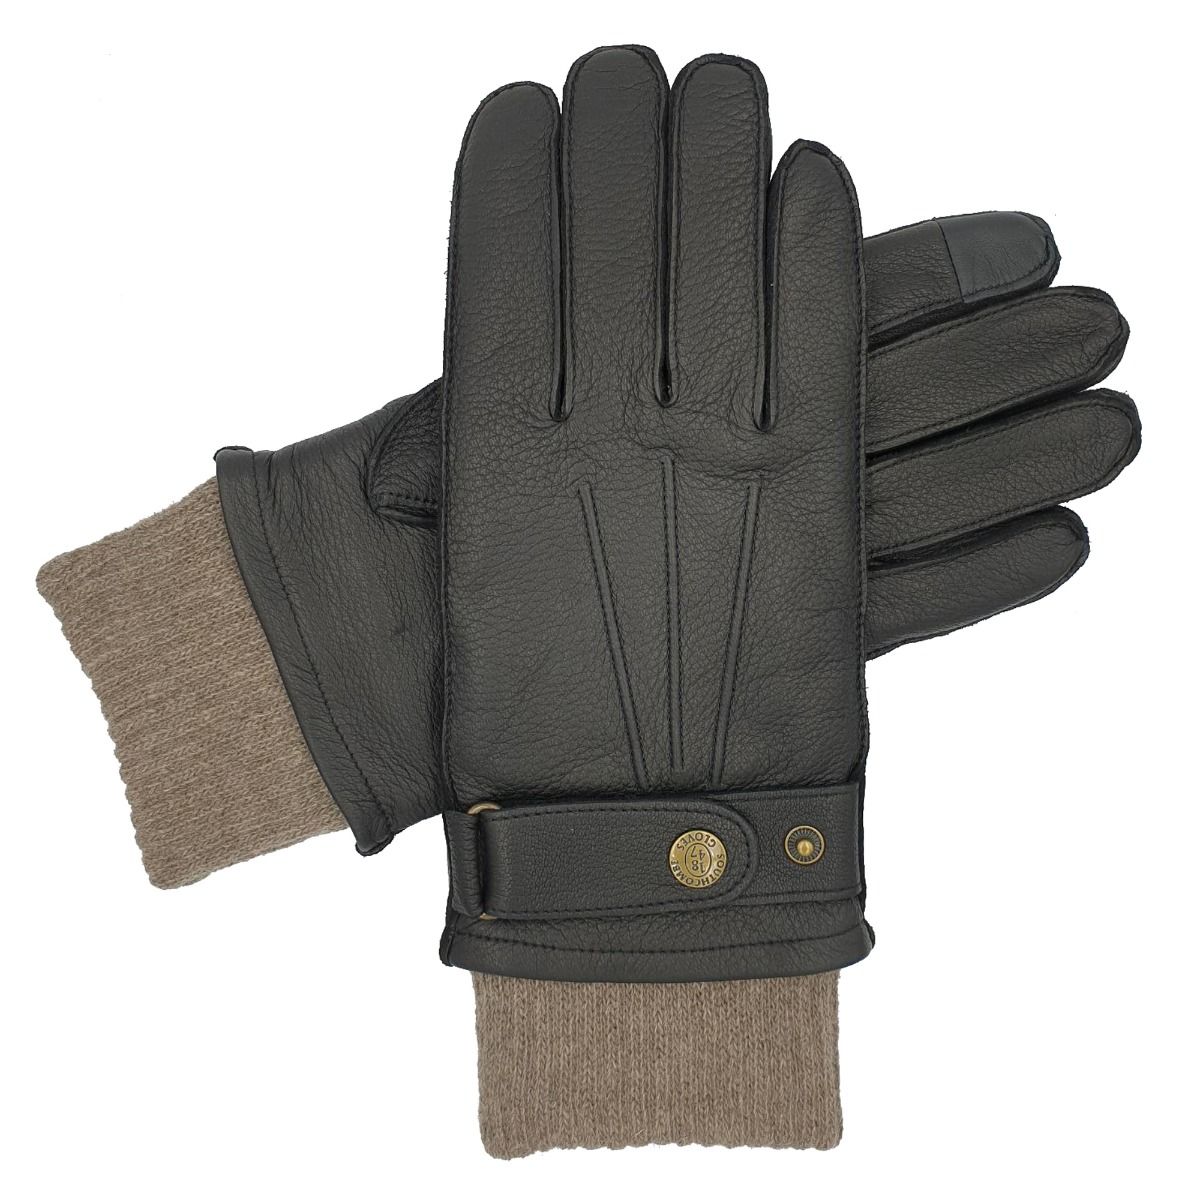 Southcombe Reeves - Cashmere Lined Deerskin Gloves Black